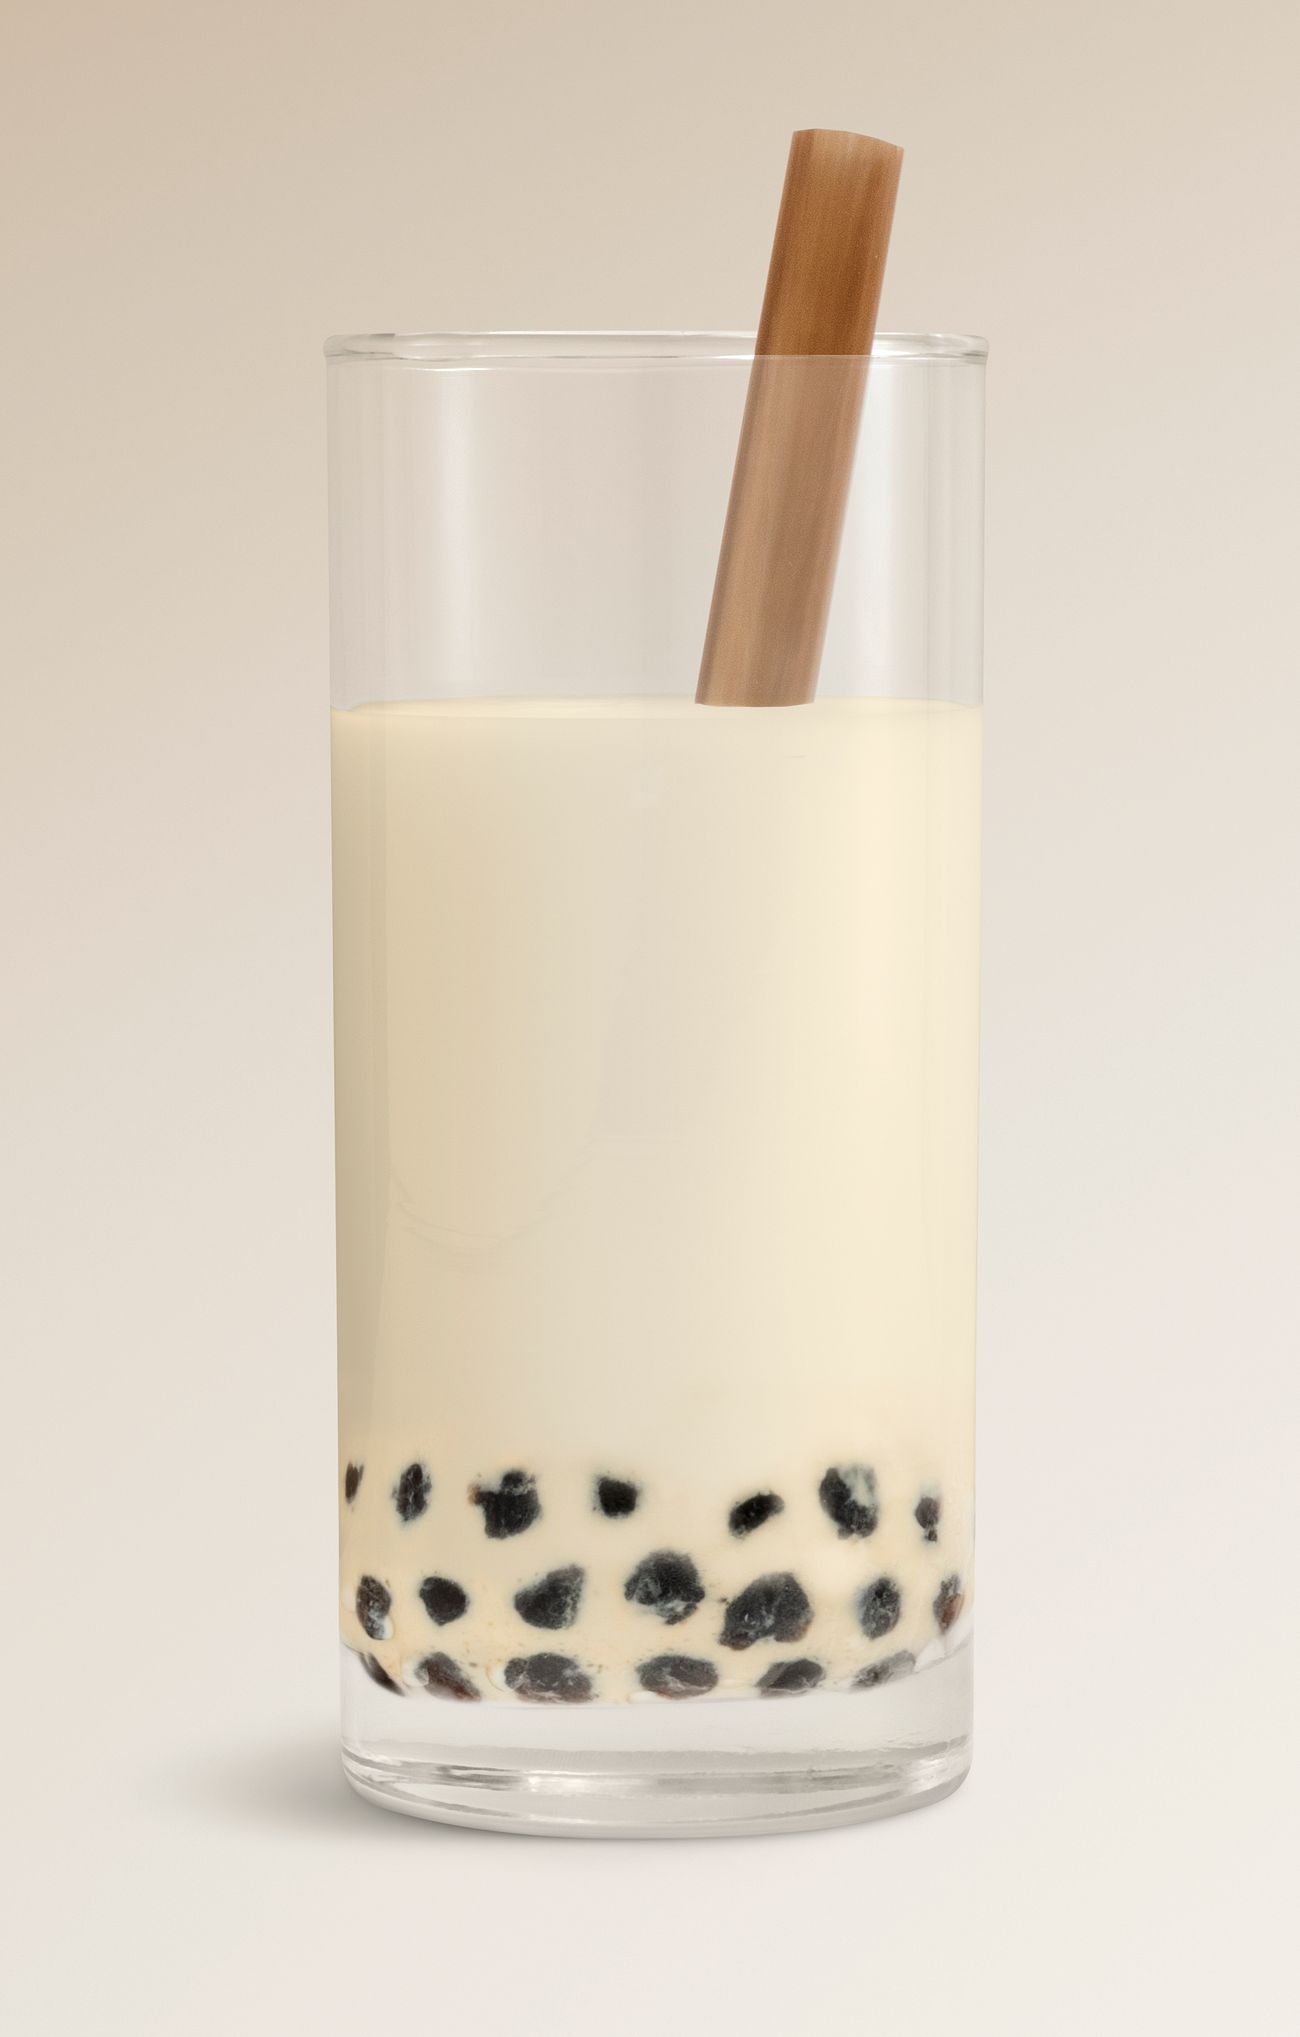 Download Bubble milk tea in a glass design resource | Royalty free ...